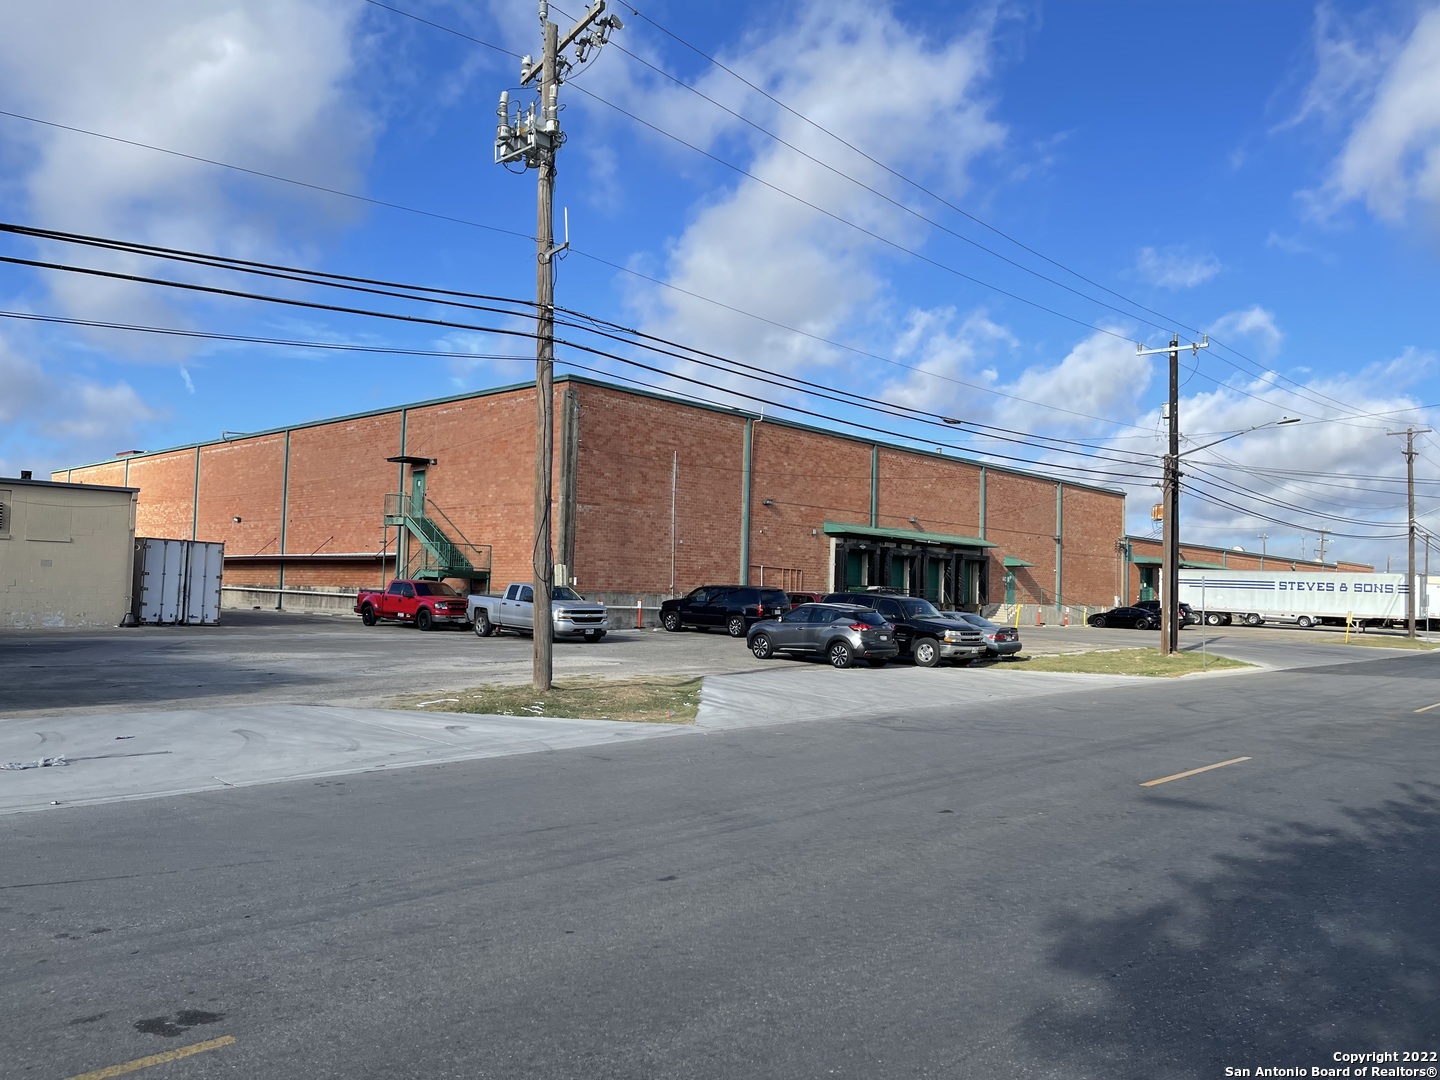 Excellent opportunity for an 87,000 sf dual tenant warehouse building near IH-35 with significant income stream between two reputable tenants. Building is 100% leased and currently configured for dual tenant occupancy. Good quality masonry construction, 14.5' - 24.5' clear heights, 100% air conditioned throughout all warehouse and office spaces, oversized mezzanine space with opportunity for additional office build-out, numerous dock high doors within both tenant spaces, significant frontage along Centennial Boulevard, etc.